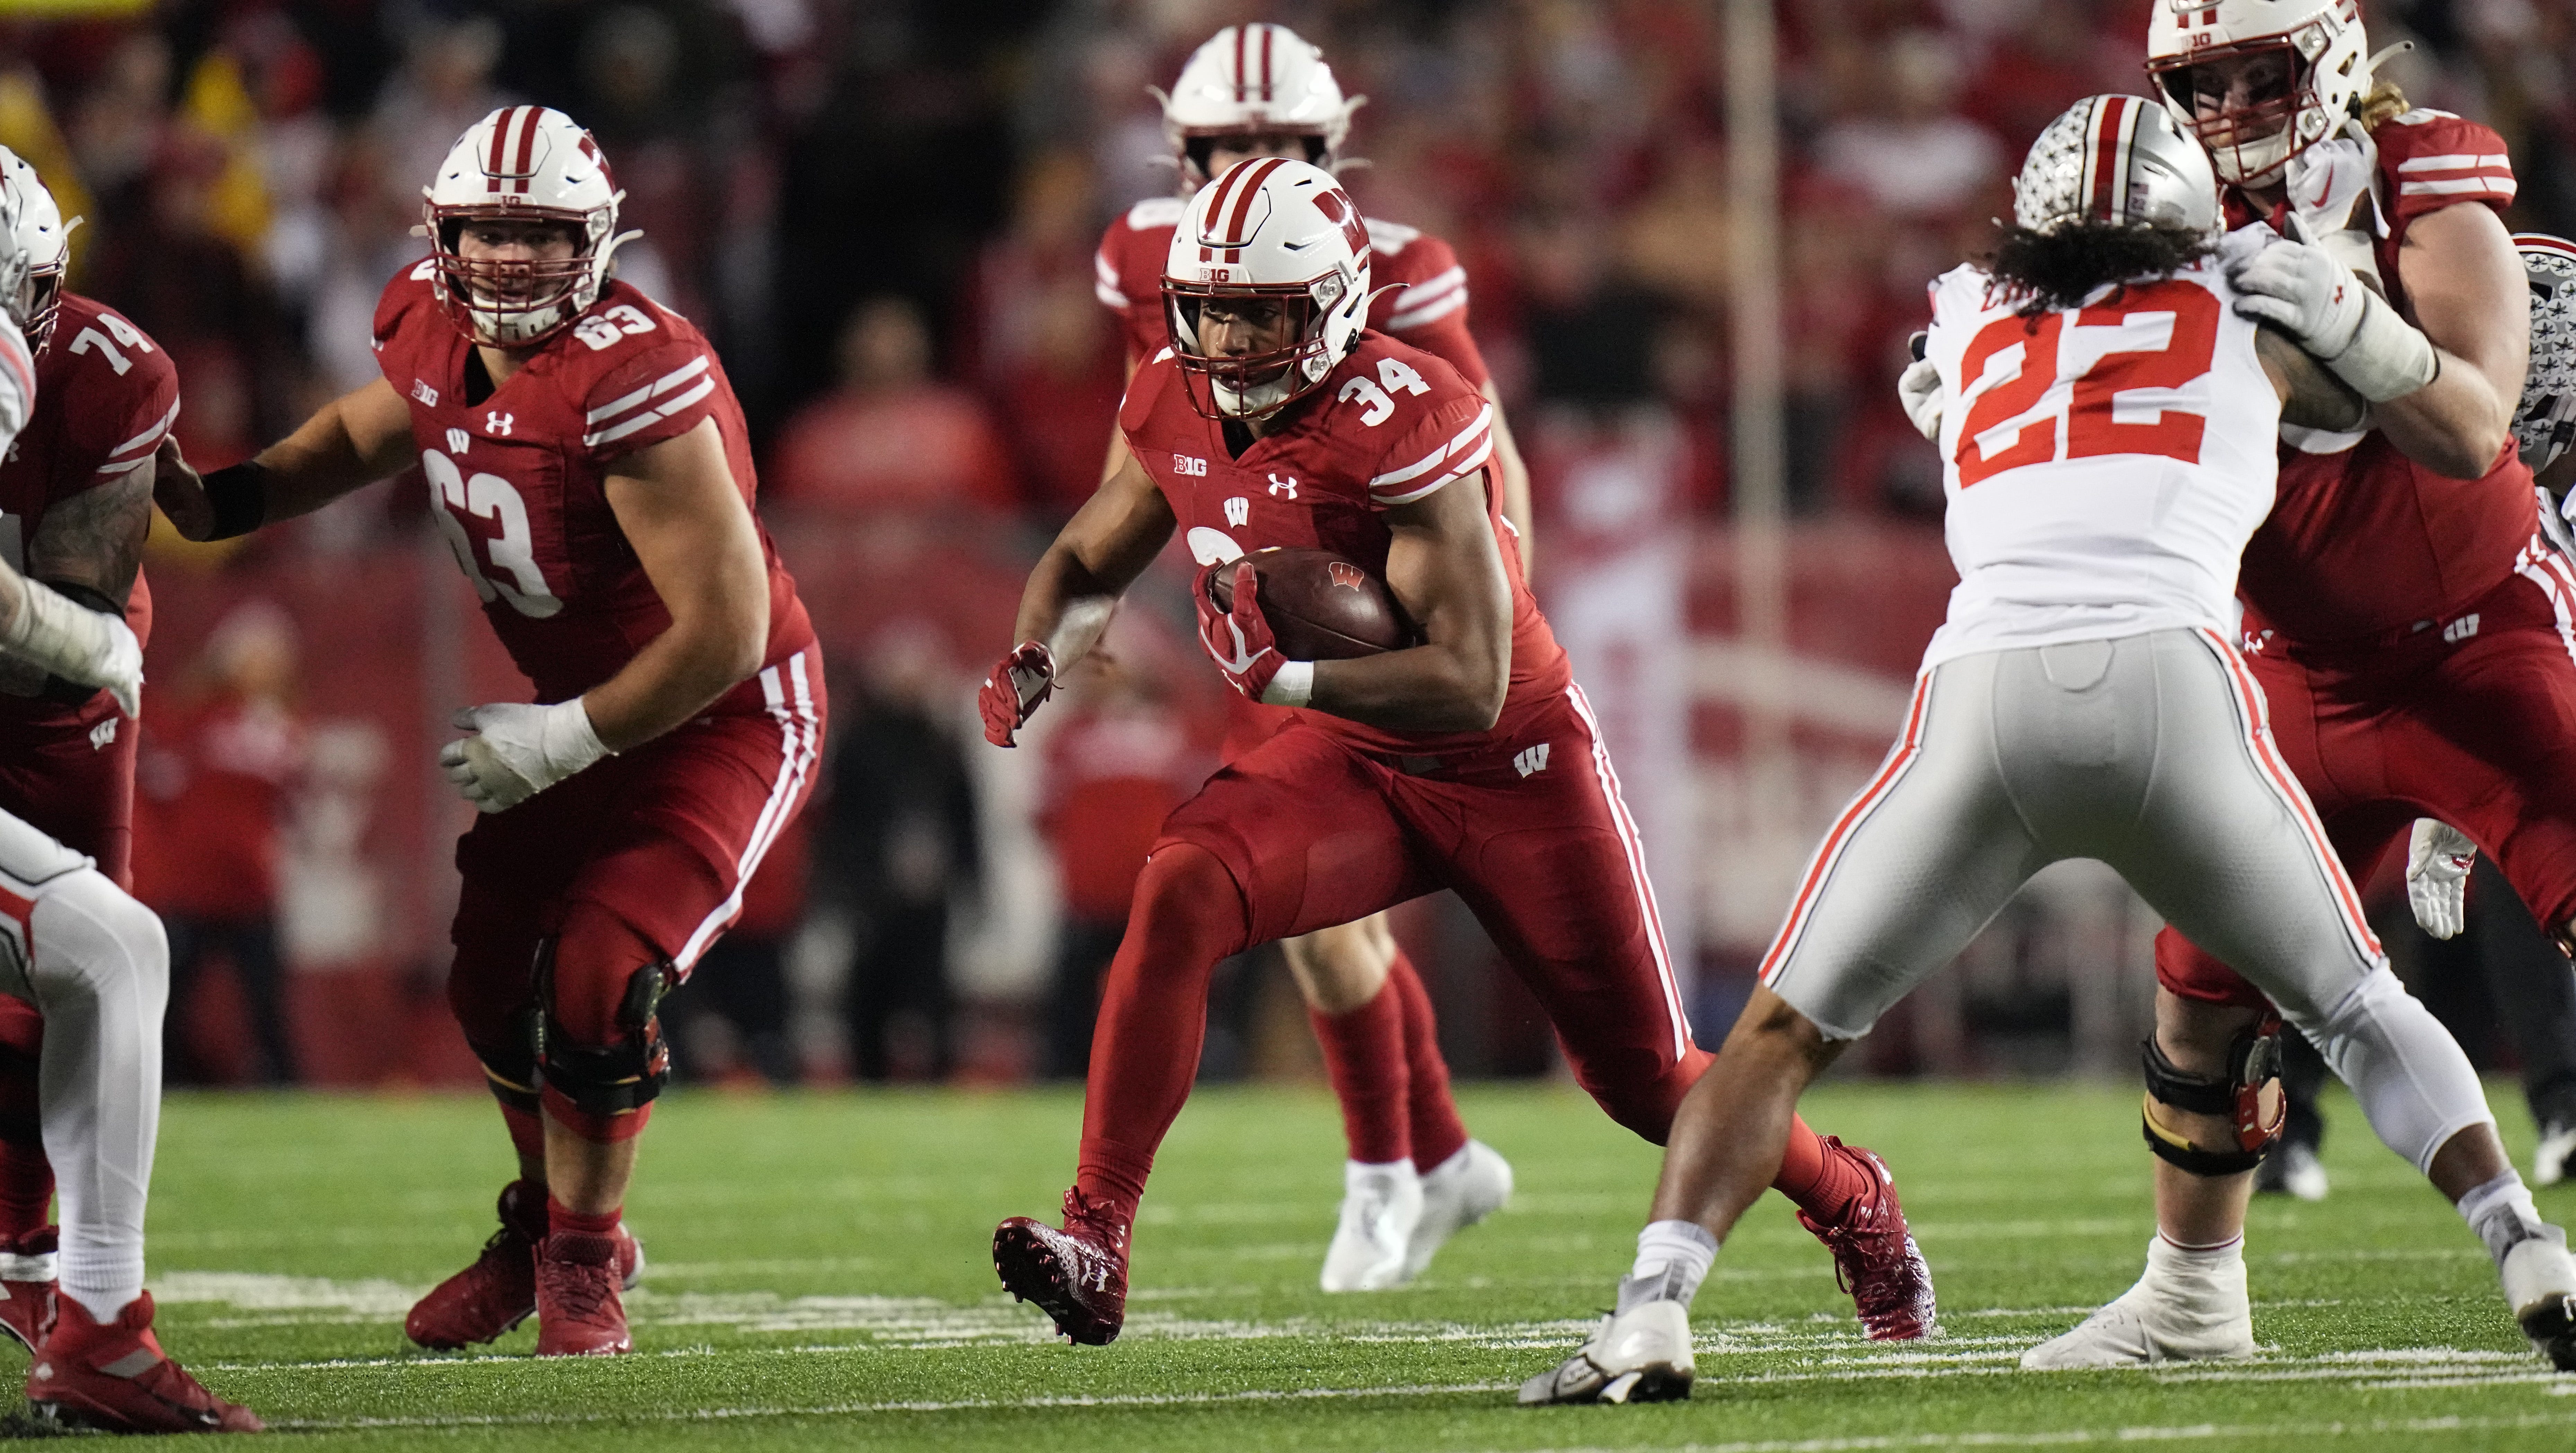 Wisconsin running back Jackson Acker (34) finds a seam in the Ohio State defense during the third quarter of their game Saturday, October 28, 2023 at Camp Randall Stadium in Madison, Wisconsin. Ohio State beat Wisconsin 24-10.